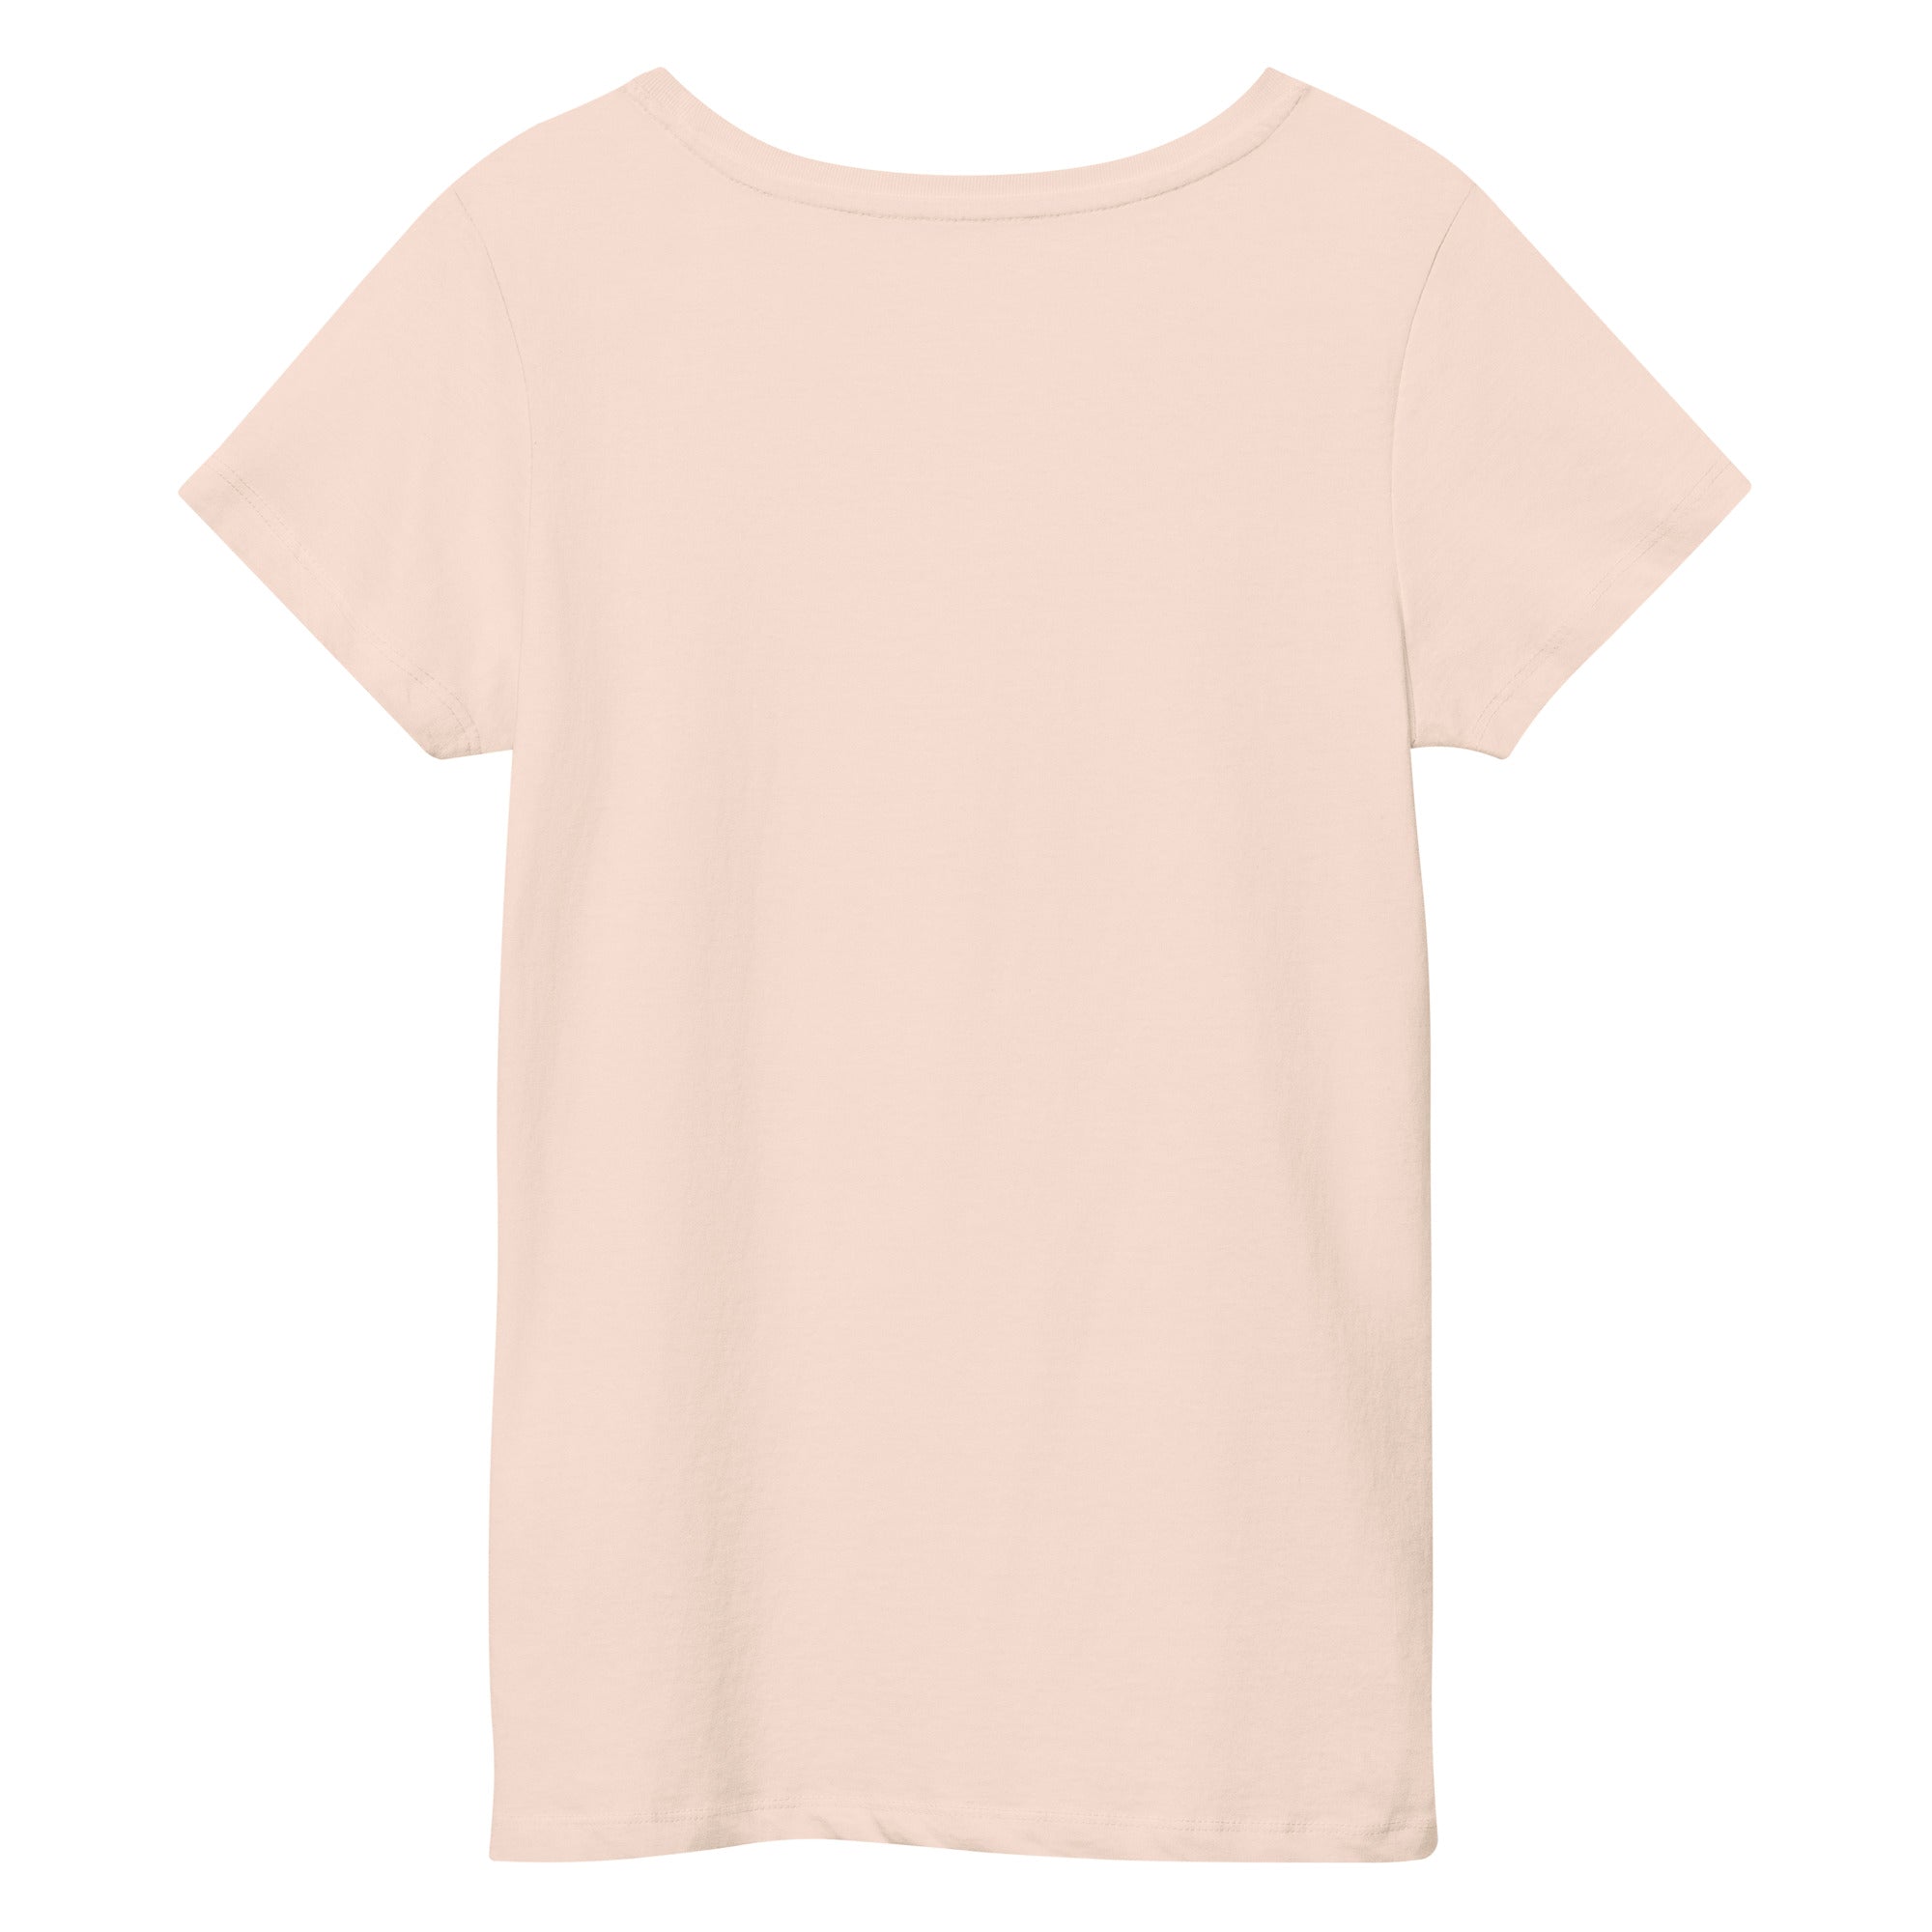 Women’s basic organic yoga t-shirt - PersonalHour Style - Personal Hour for Yoga and Meditations 